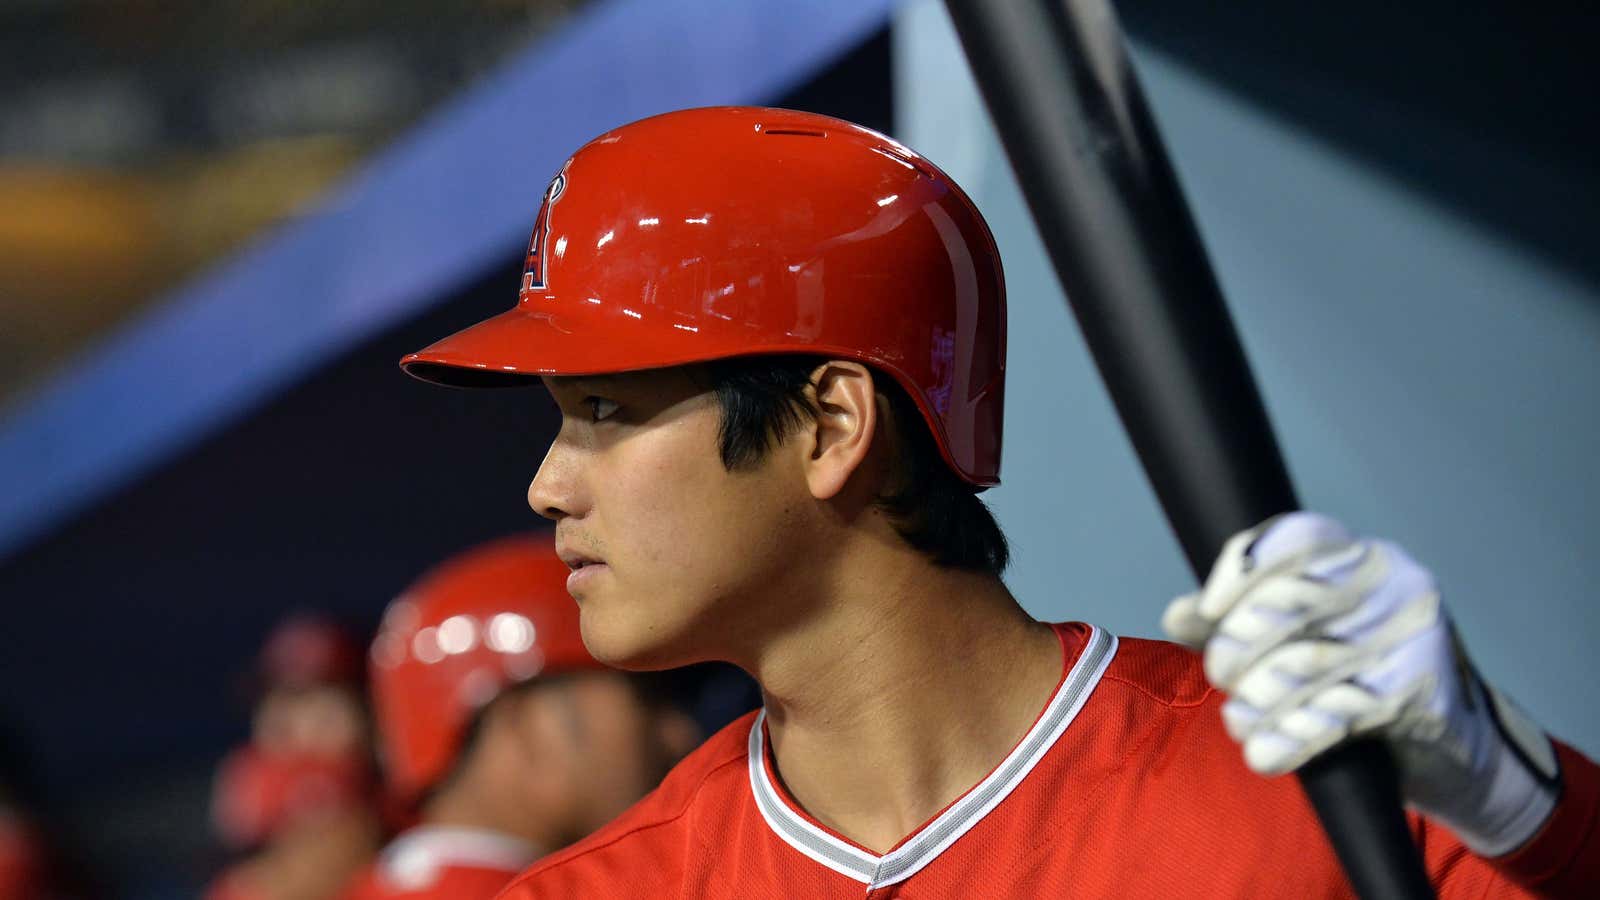 Japan’s best player is about to take his first crack at Major League Baseball.